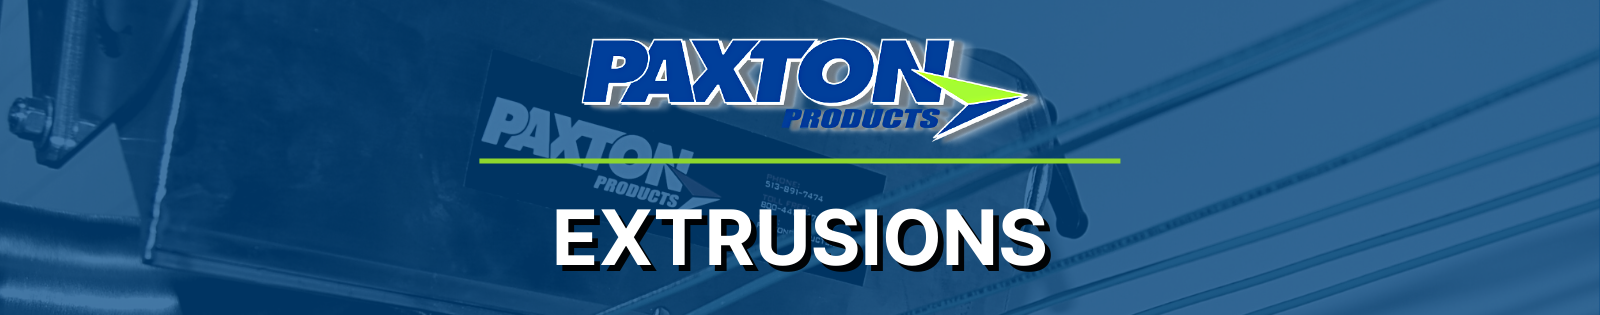 Paxton Products - Drying & Blow Off Solutions for Extrusions 